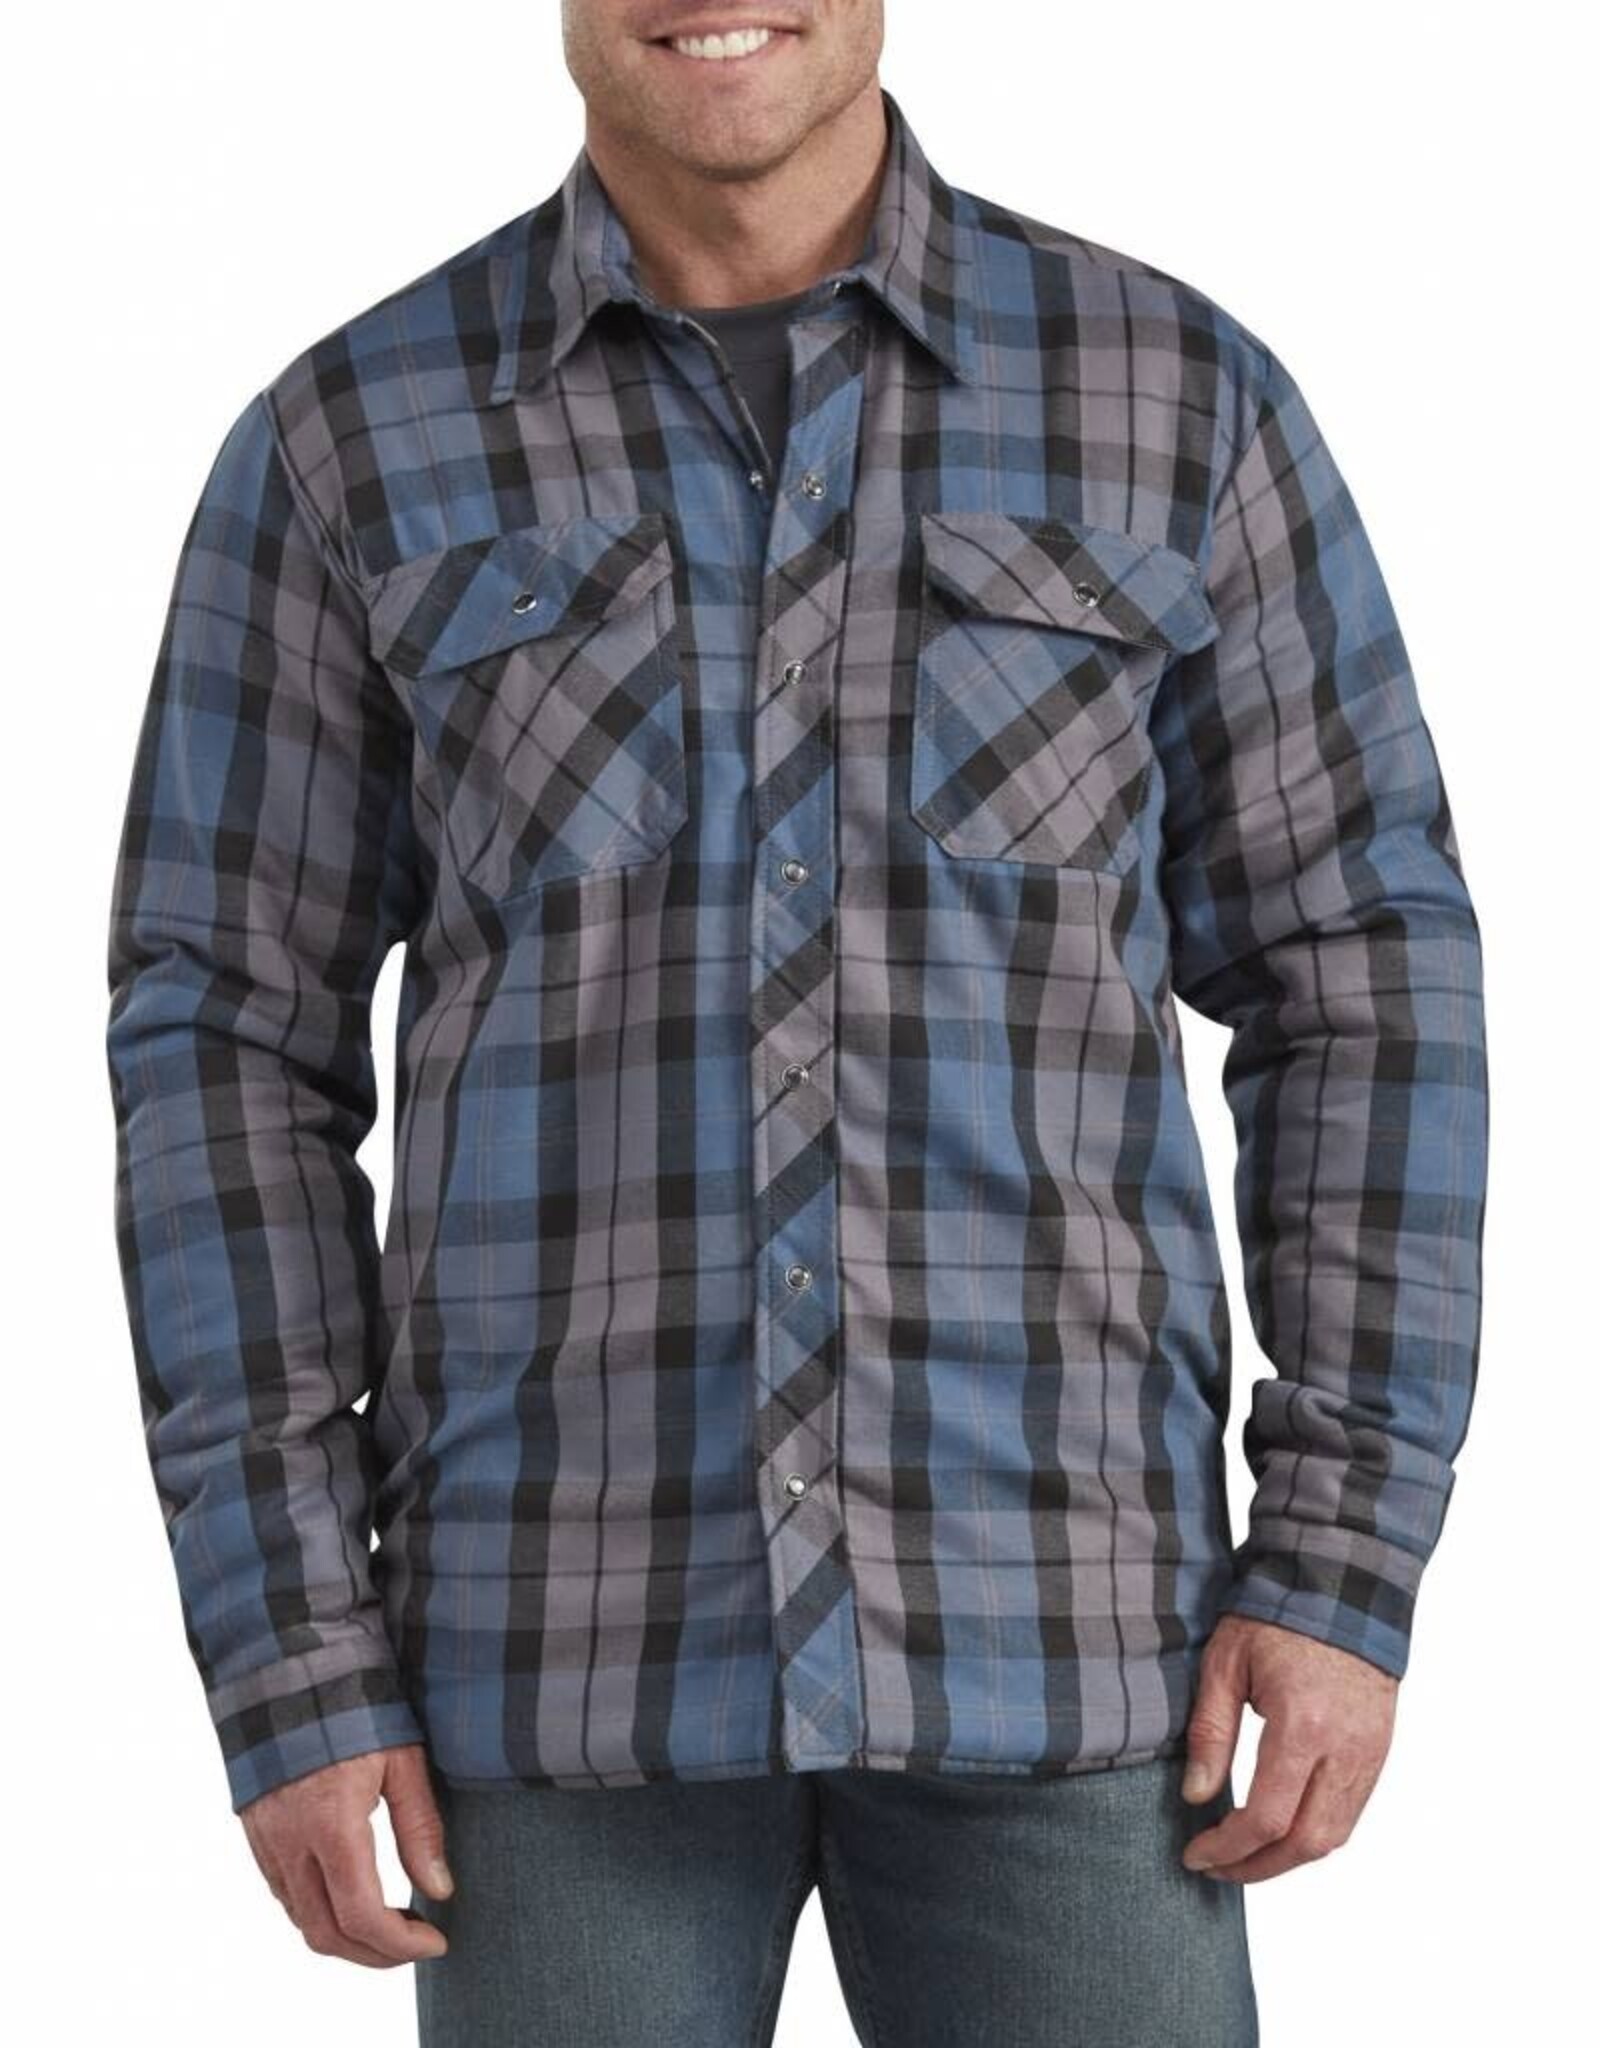 DICKIES Sherpa Lined Snap Front Jacket Insigna Blue/Charcoal Plaid - TJ200PUO